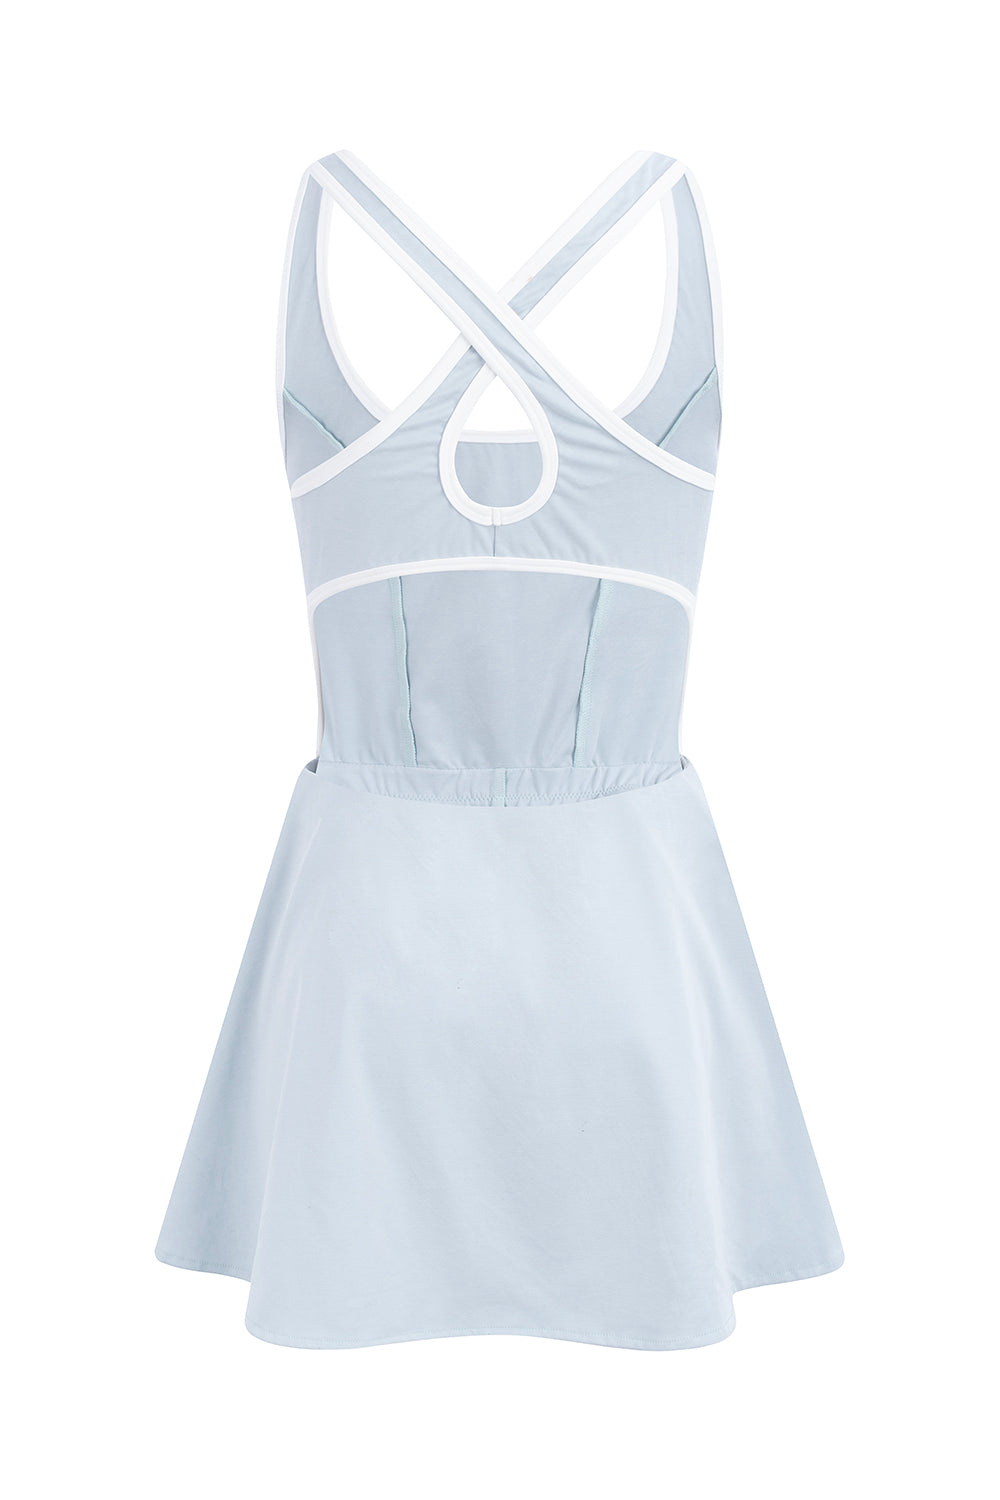 SOFT TOUCH LIGHT BLUE COURT DRESS (OUT OF STOCK)